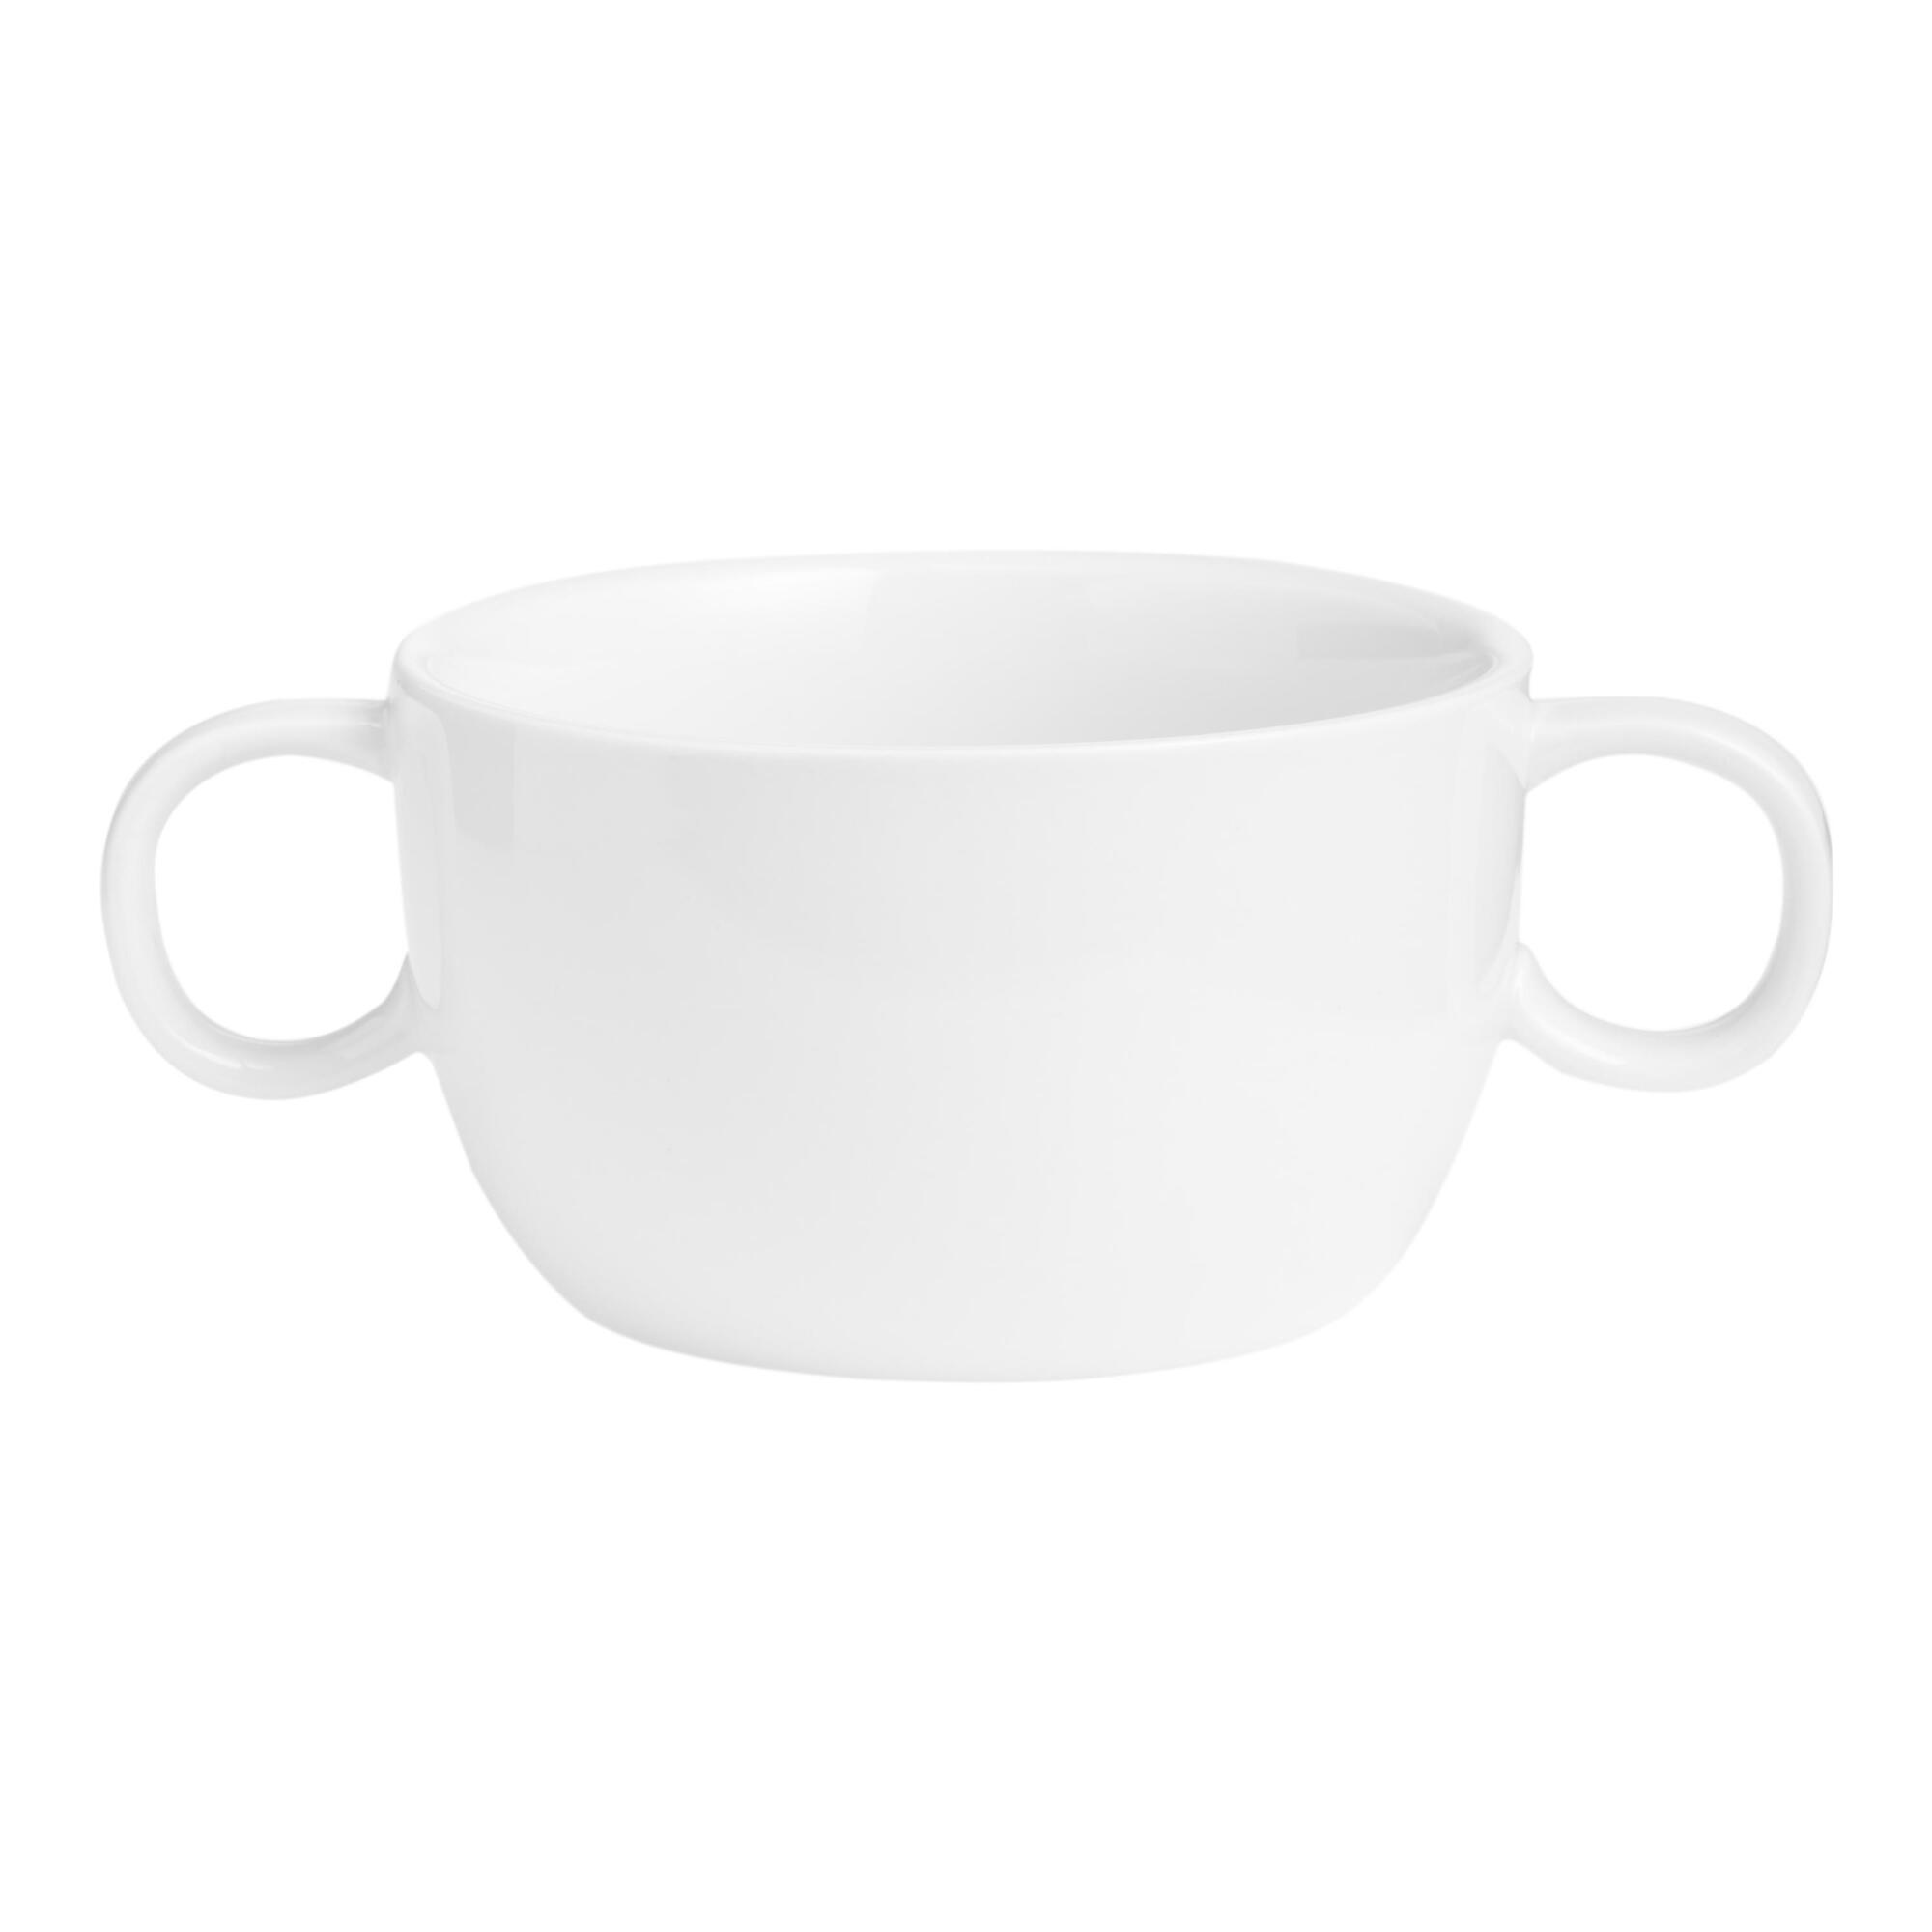 White Porcelain Coupe Soup Bowl with Handles Set of 2 by World Market